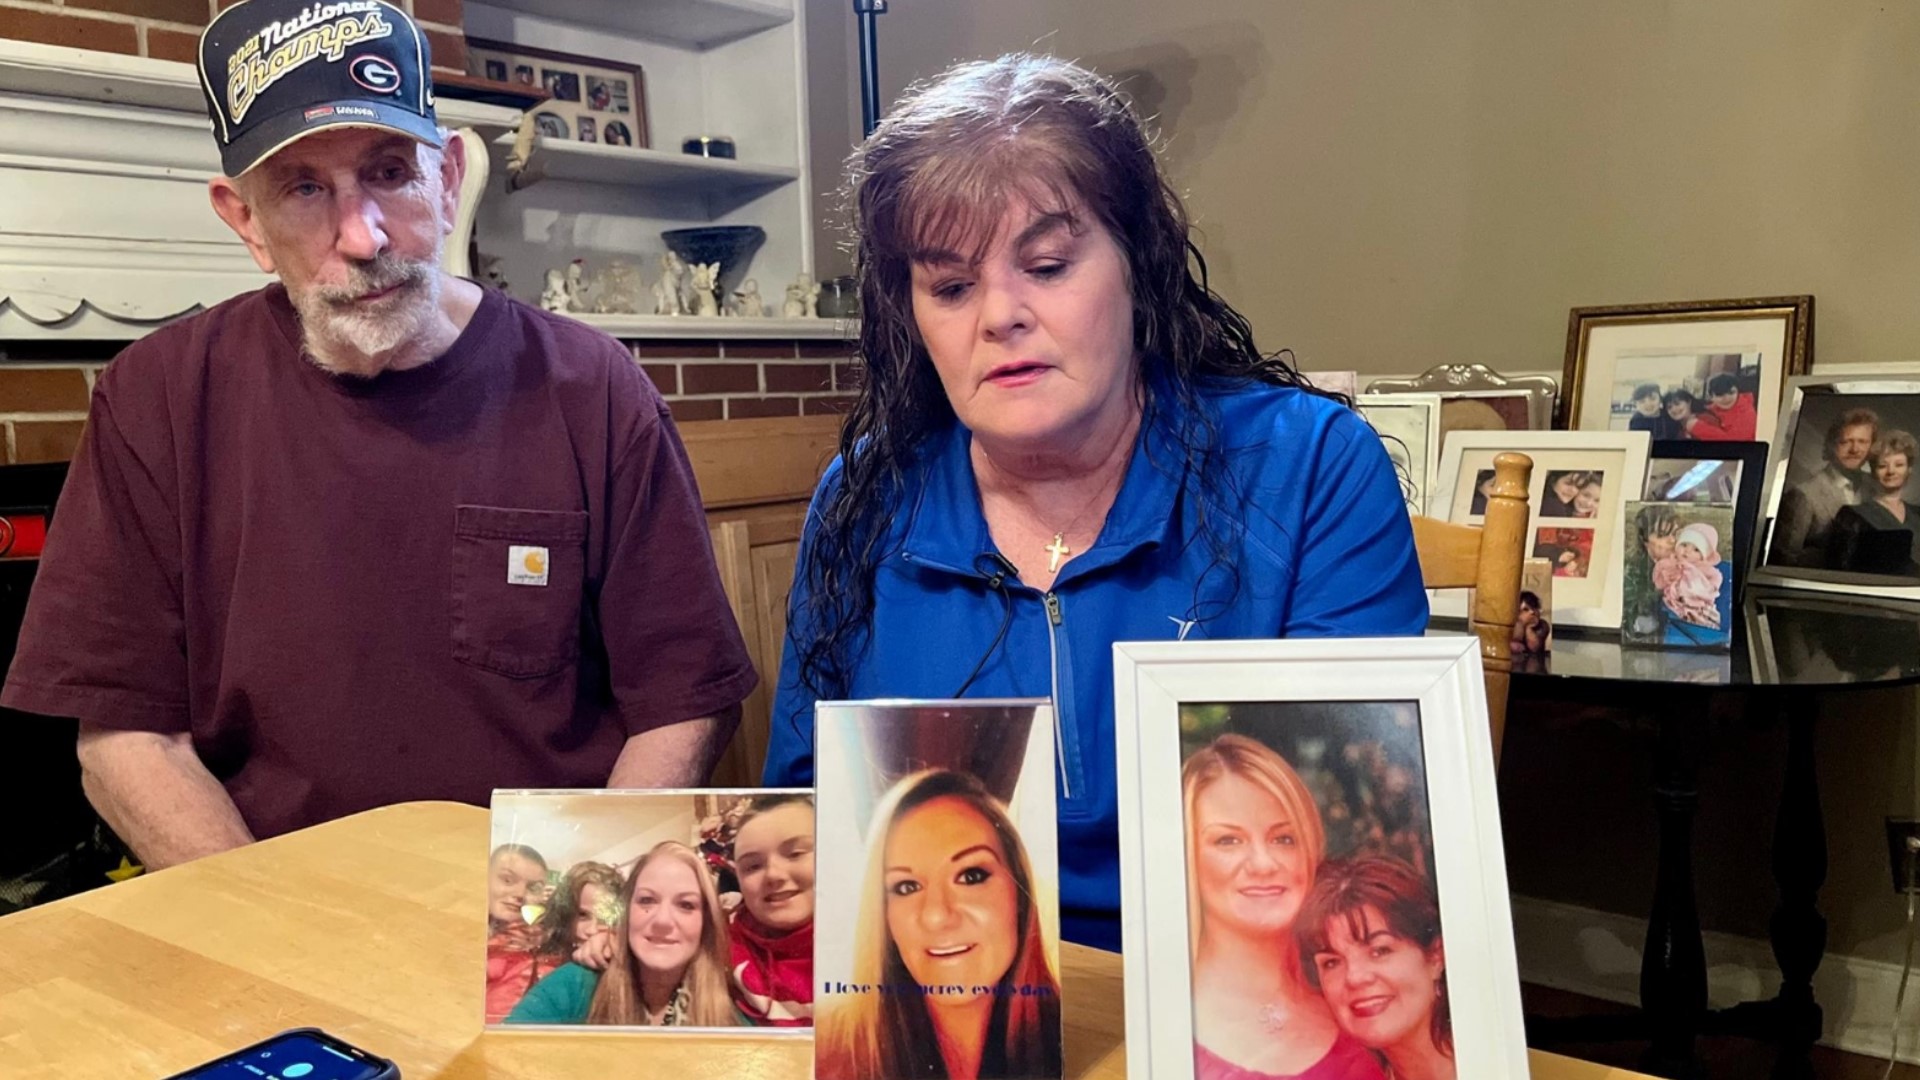 Cherish Brooke Rande, 38, was reported missing to the Hall County Sheriff’s Office by her mother on April 21. Brandi Louise Knight is also missing.